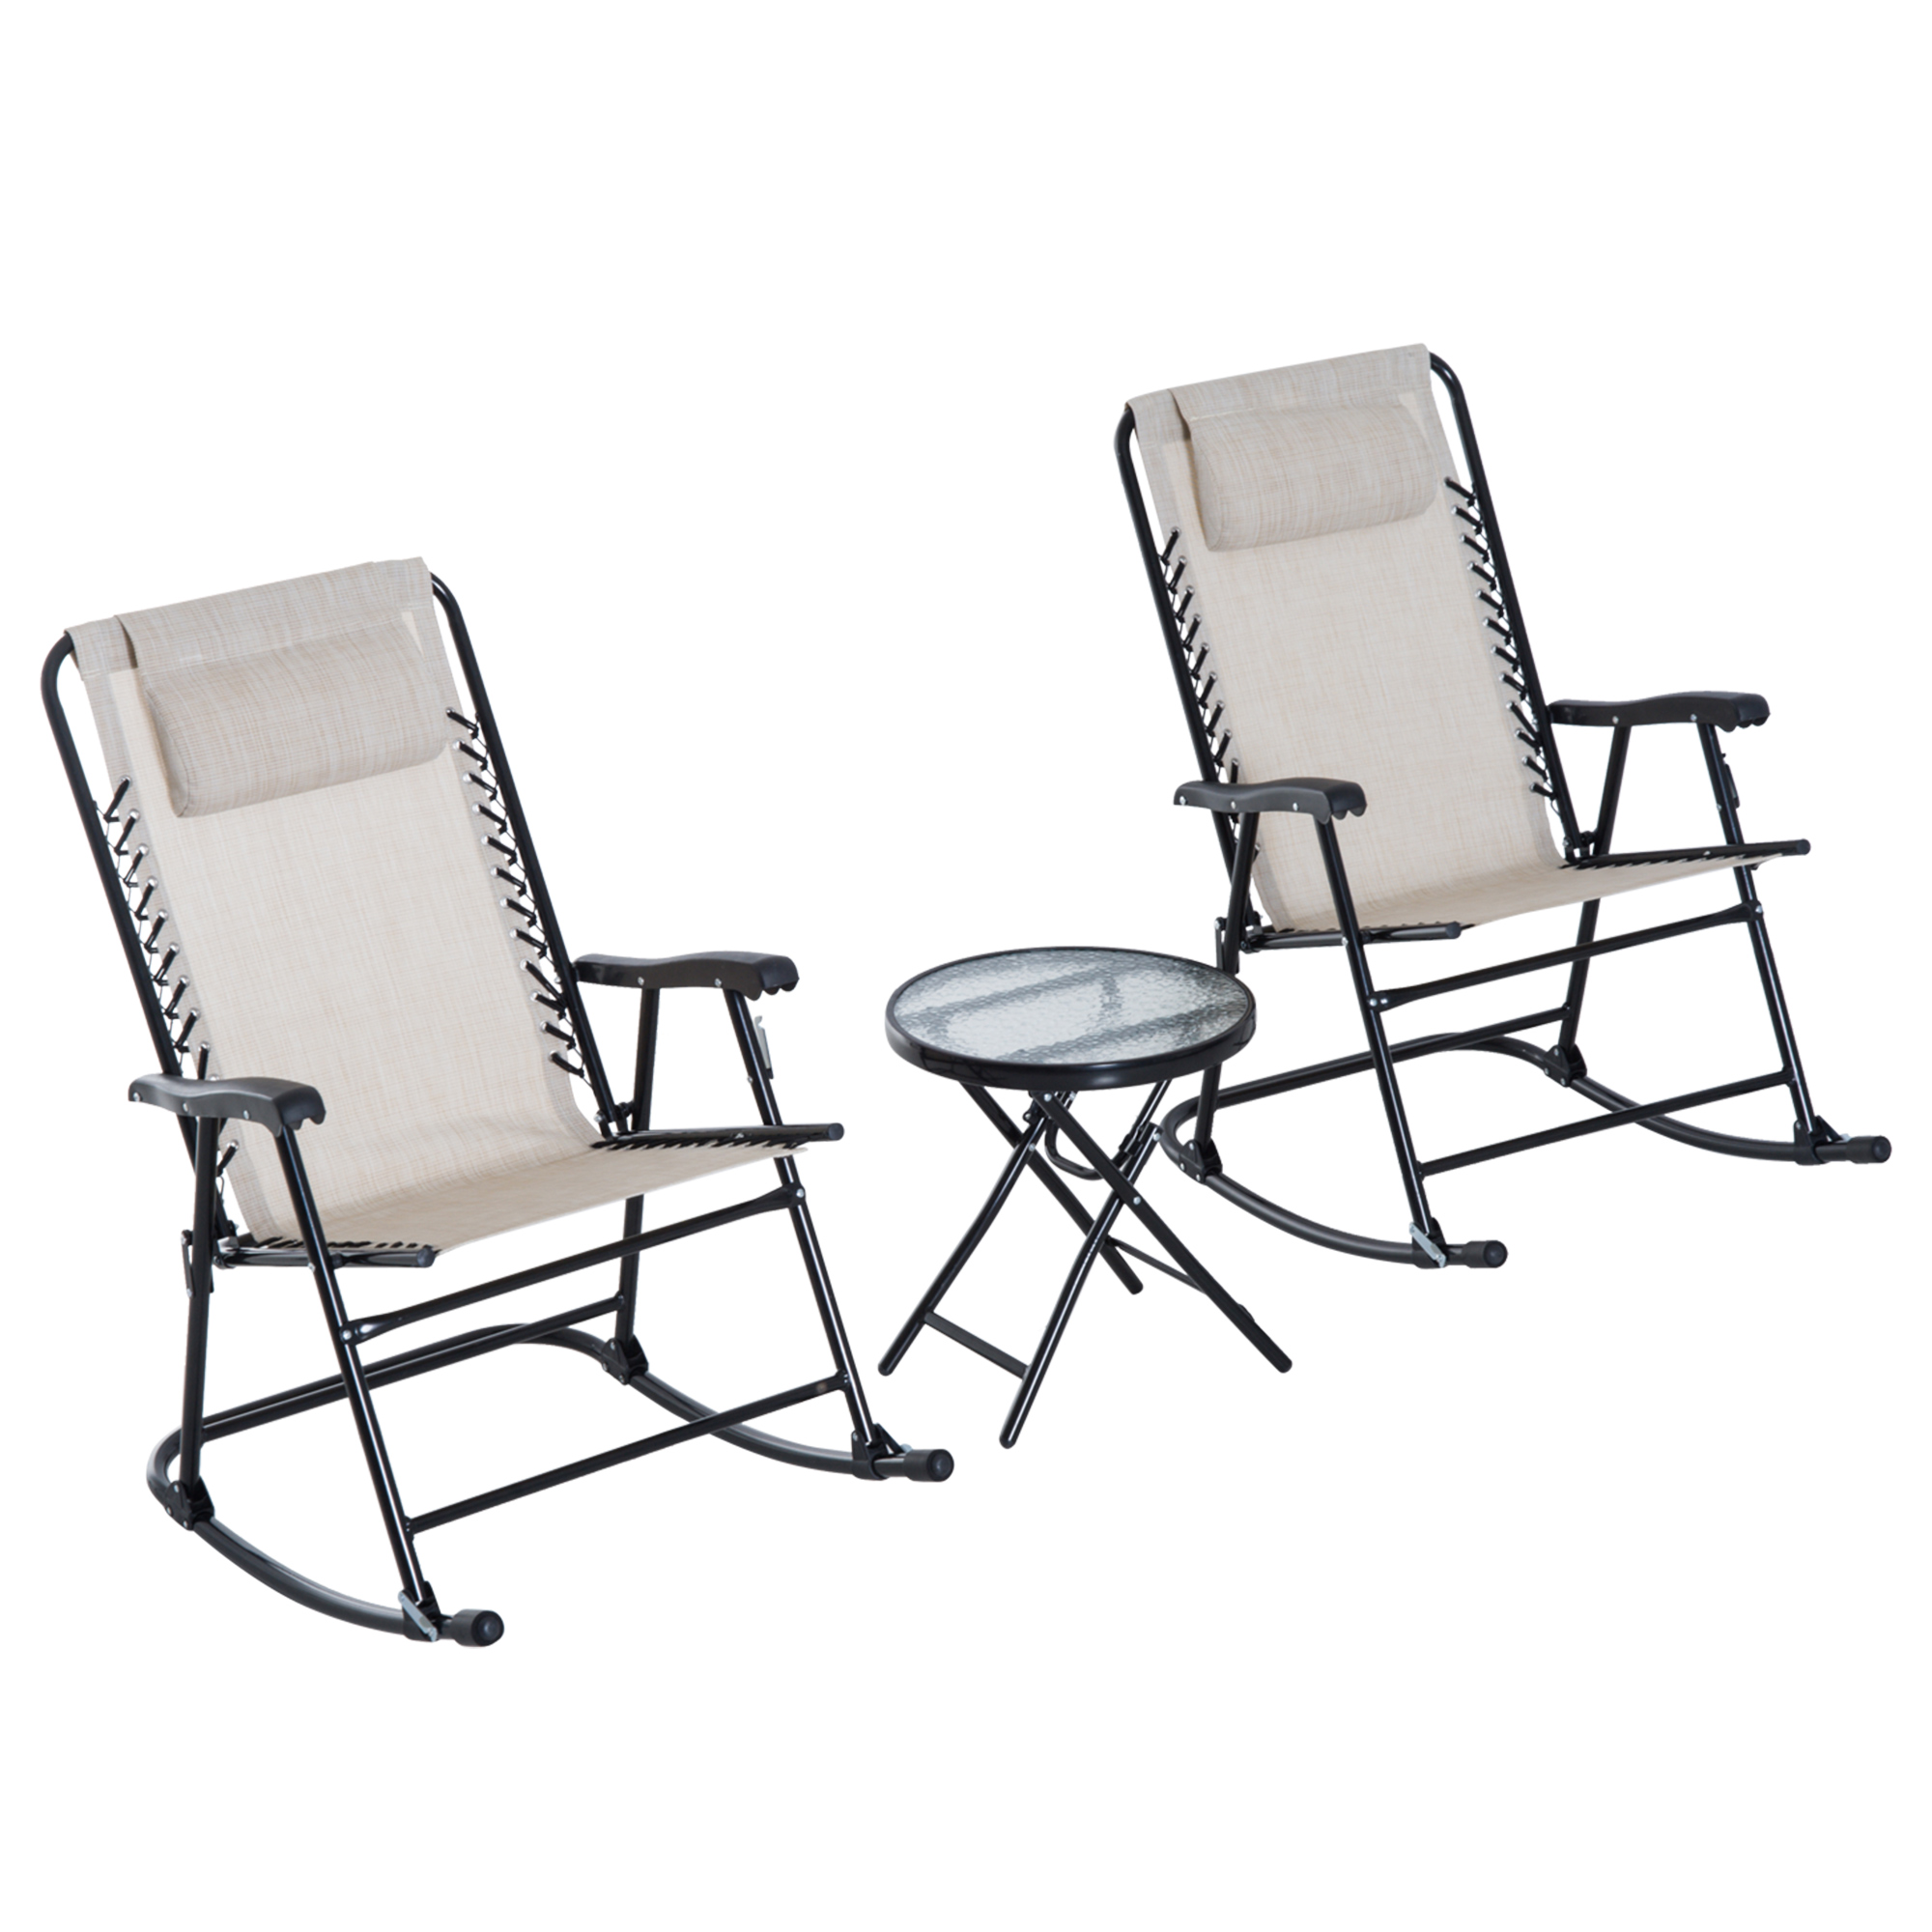 Outsunny 3 Piece Outdoor Rocking Chair Set, Patio Folding Lawn Rocker Set with Glass Coffee Table, Headrests for Yard, Patio, Deck, Backyard, Cream White - image 1 of 9